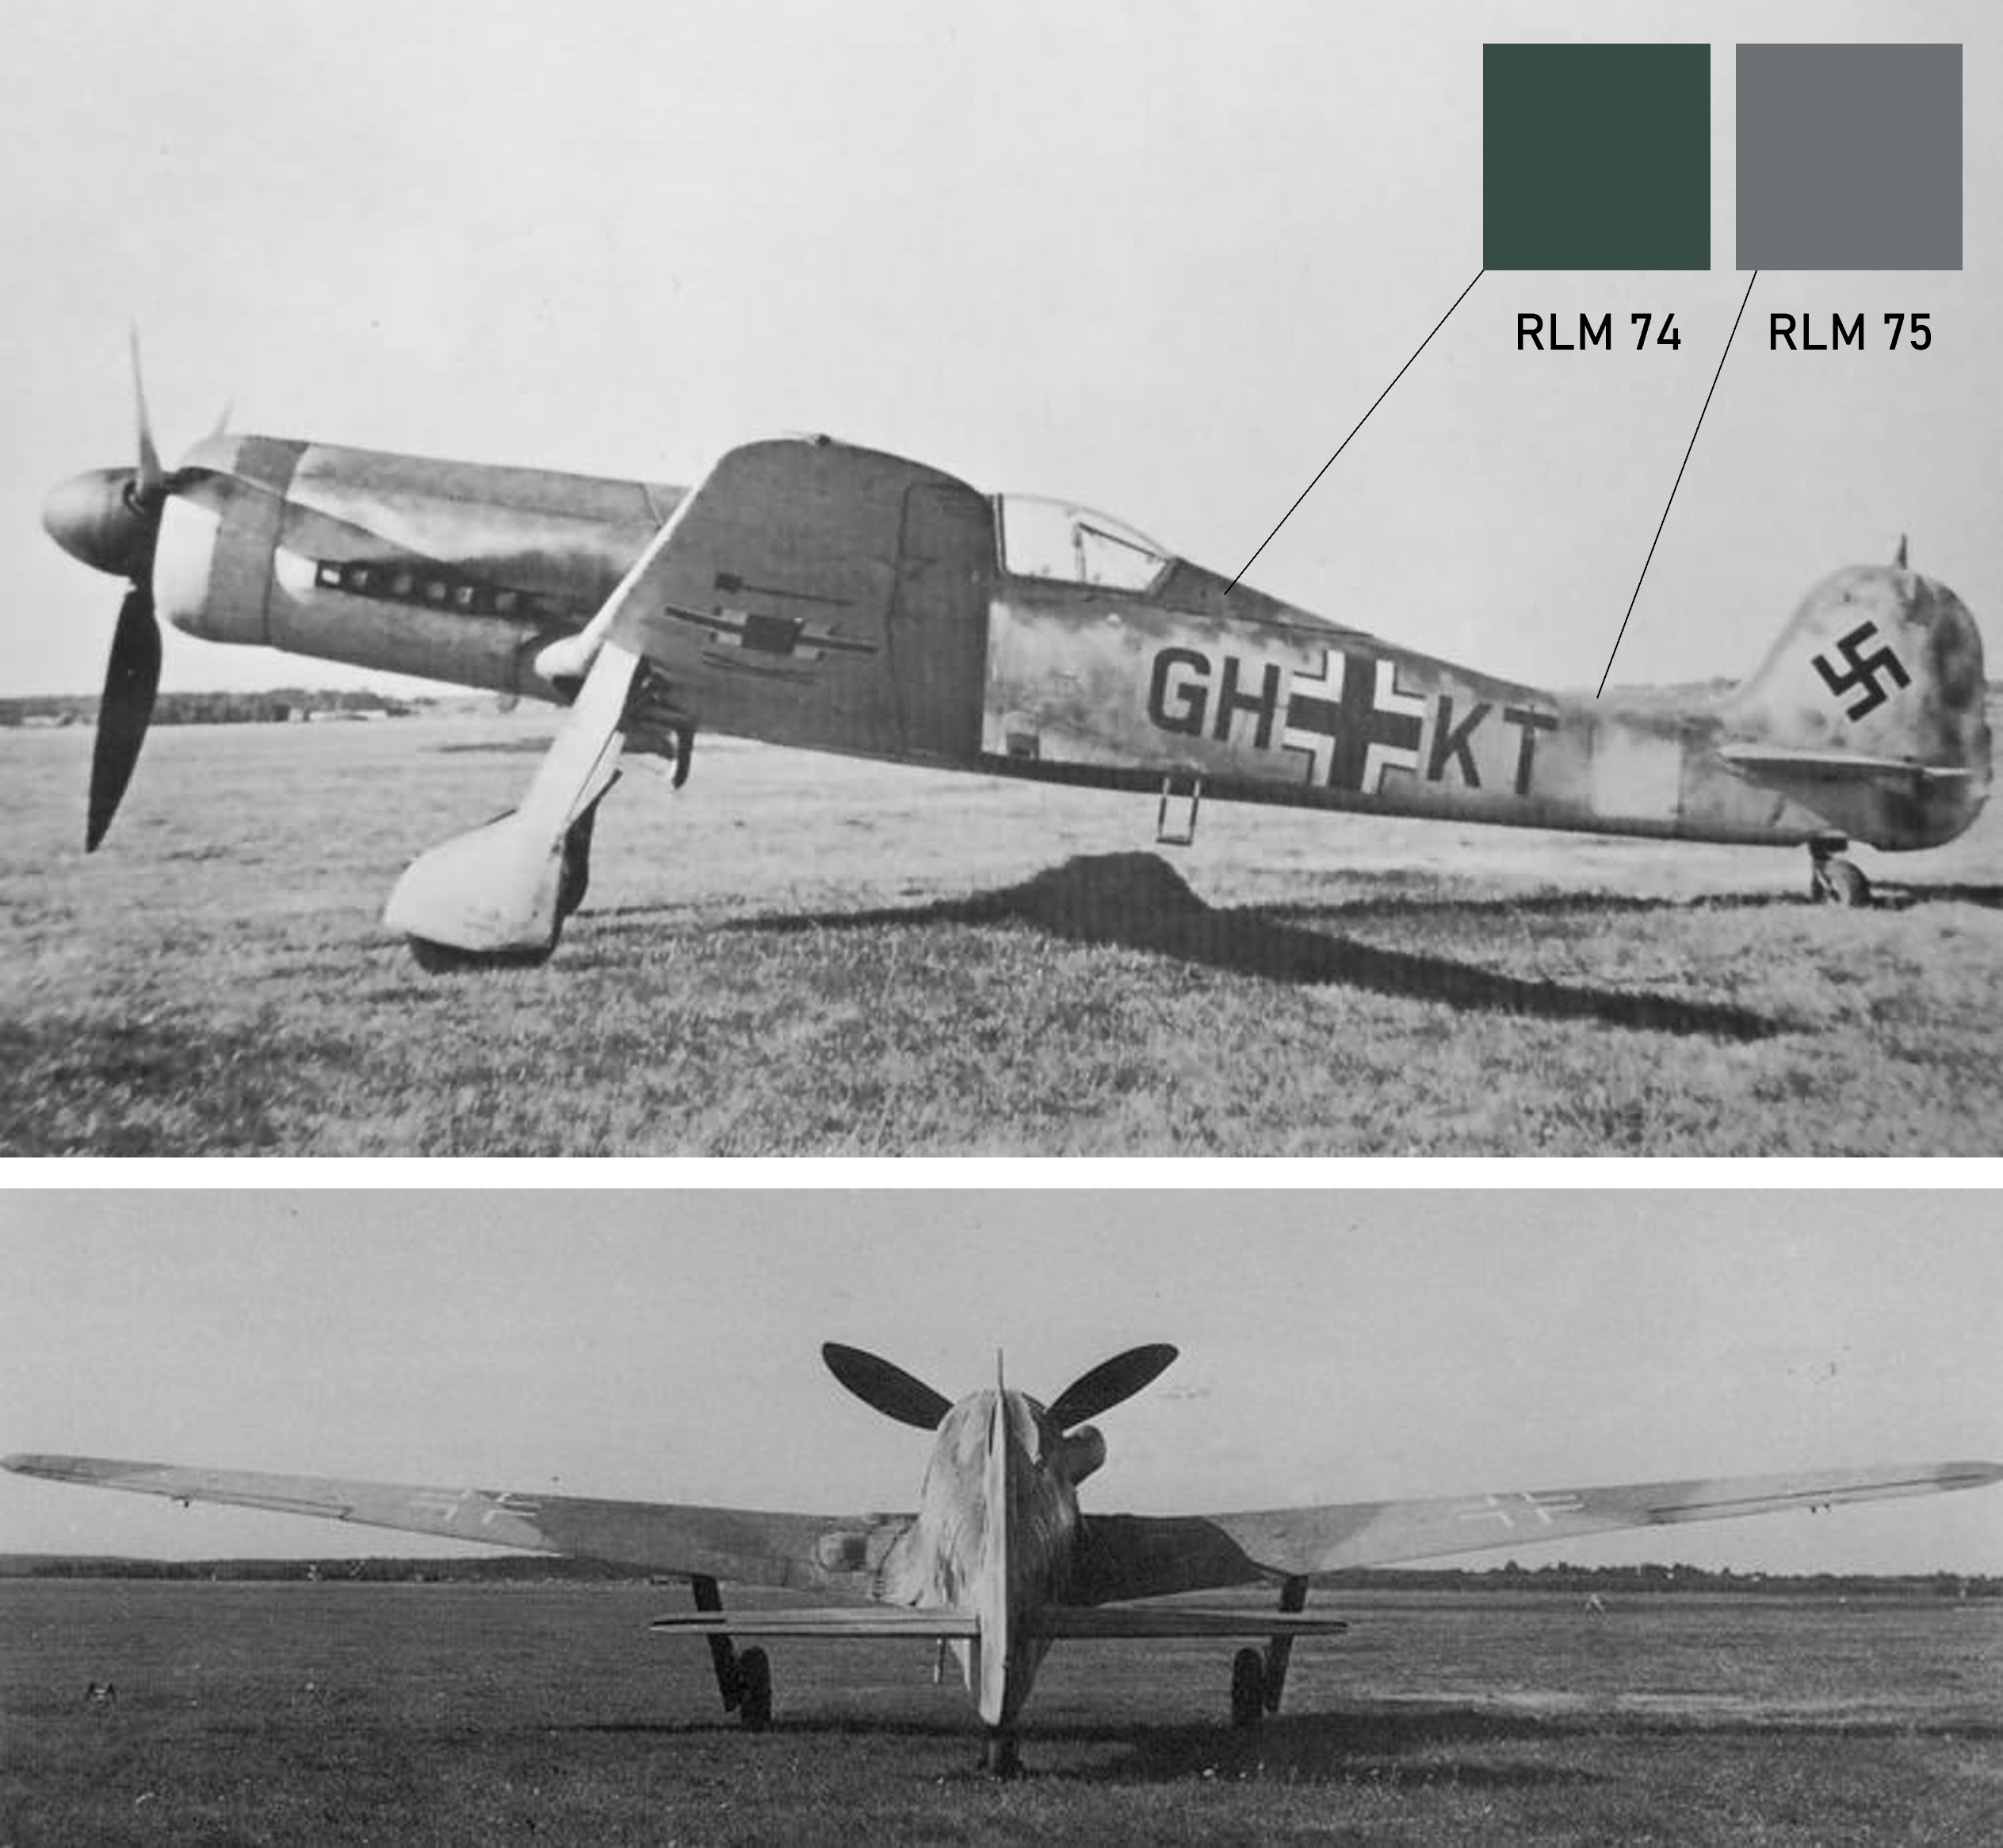 The Ta 152 H prototype: Fw 190 V30 (GH+KT). Note the upper wings camouflage scheme.